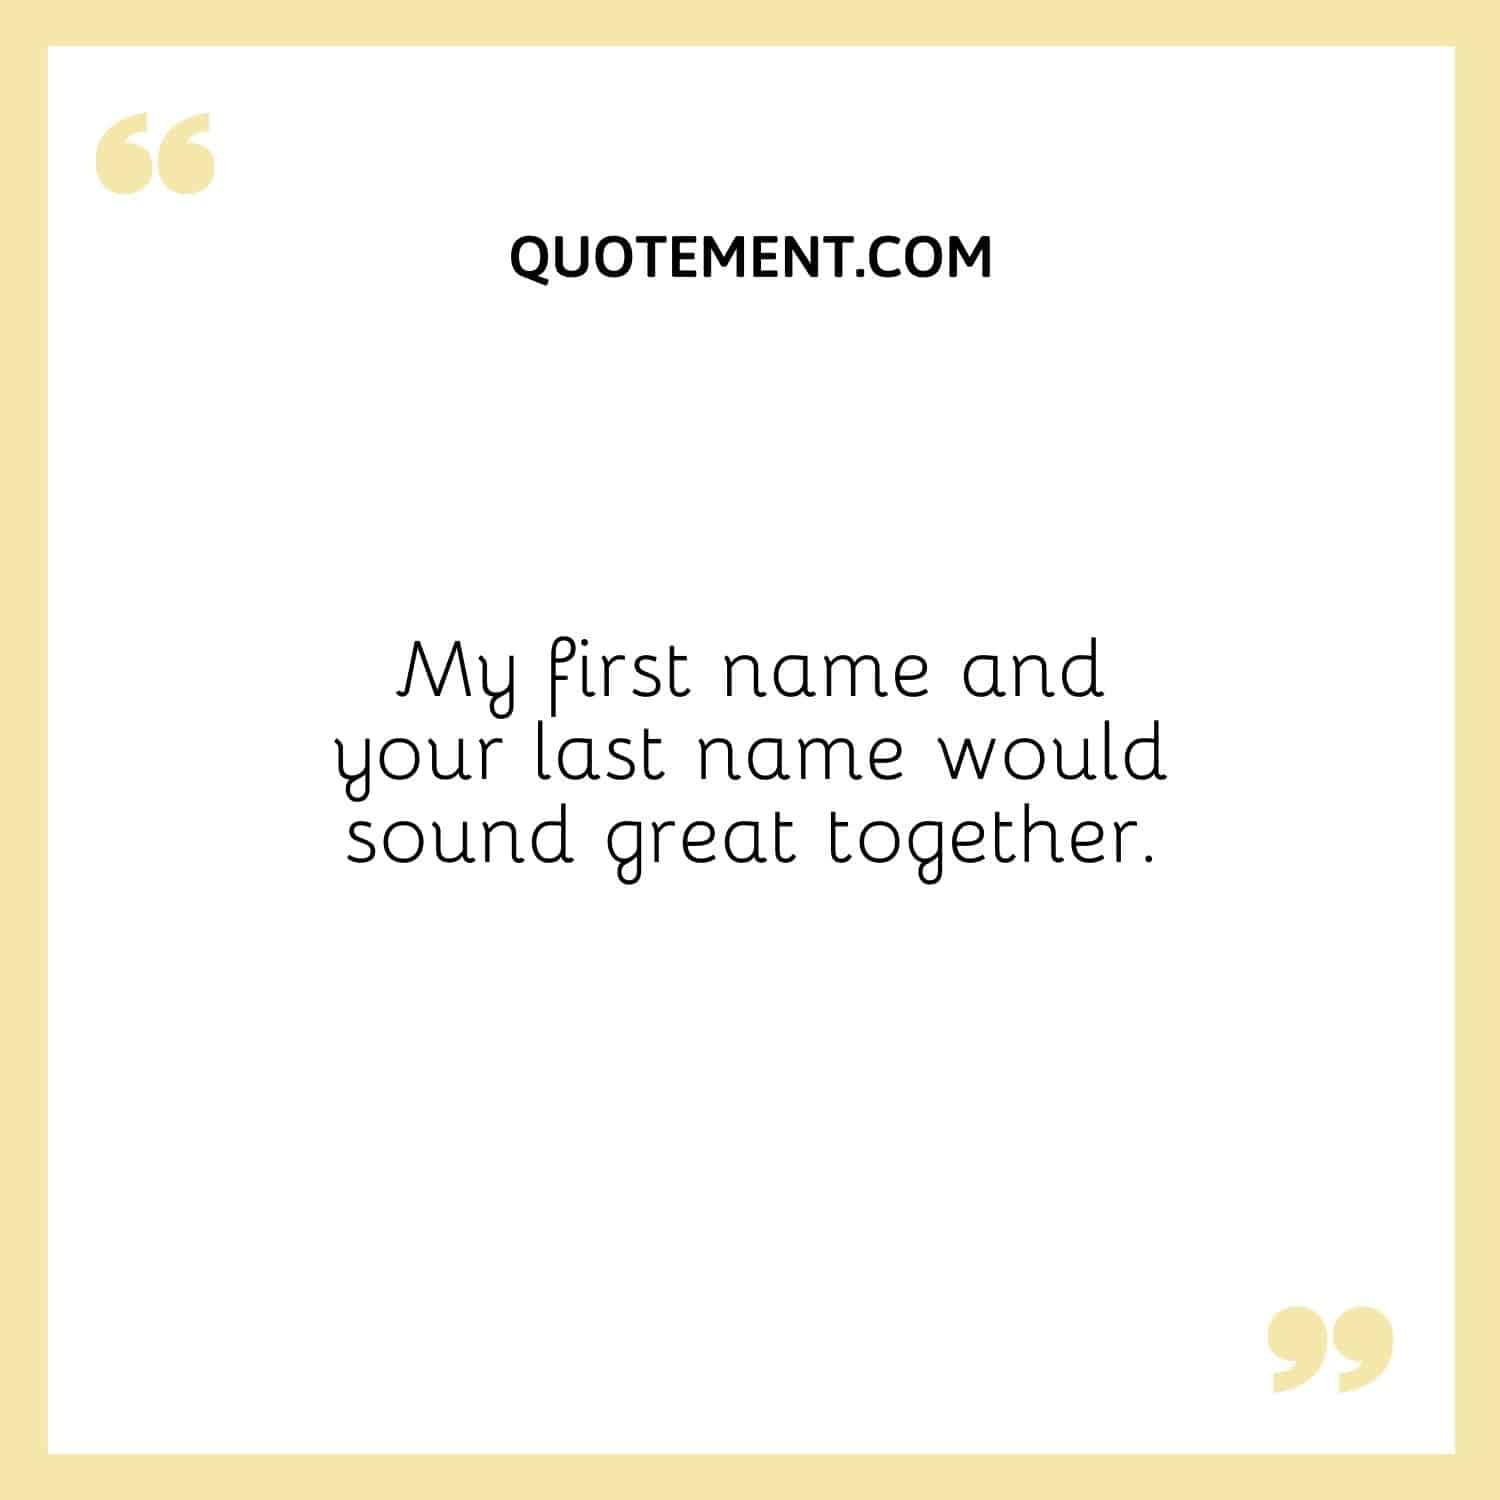 My first name and your last name would sound great together